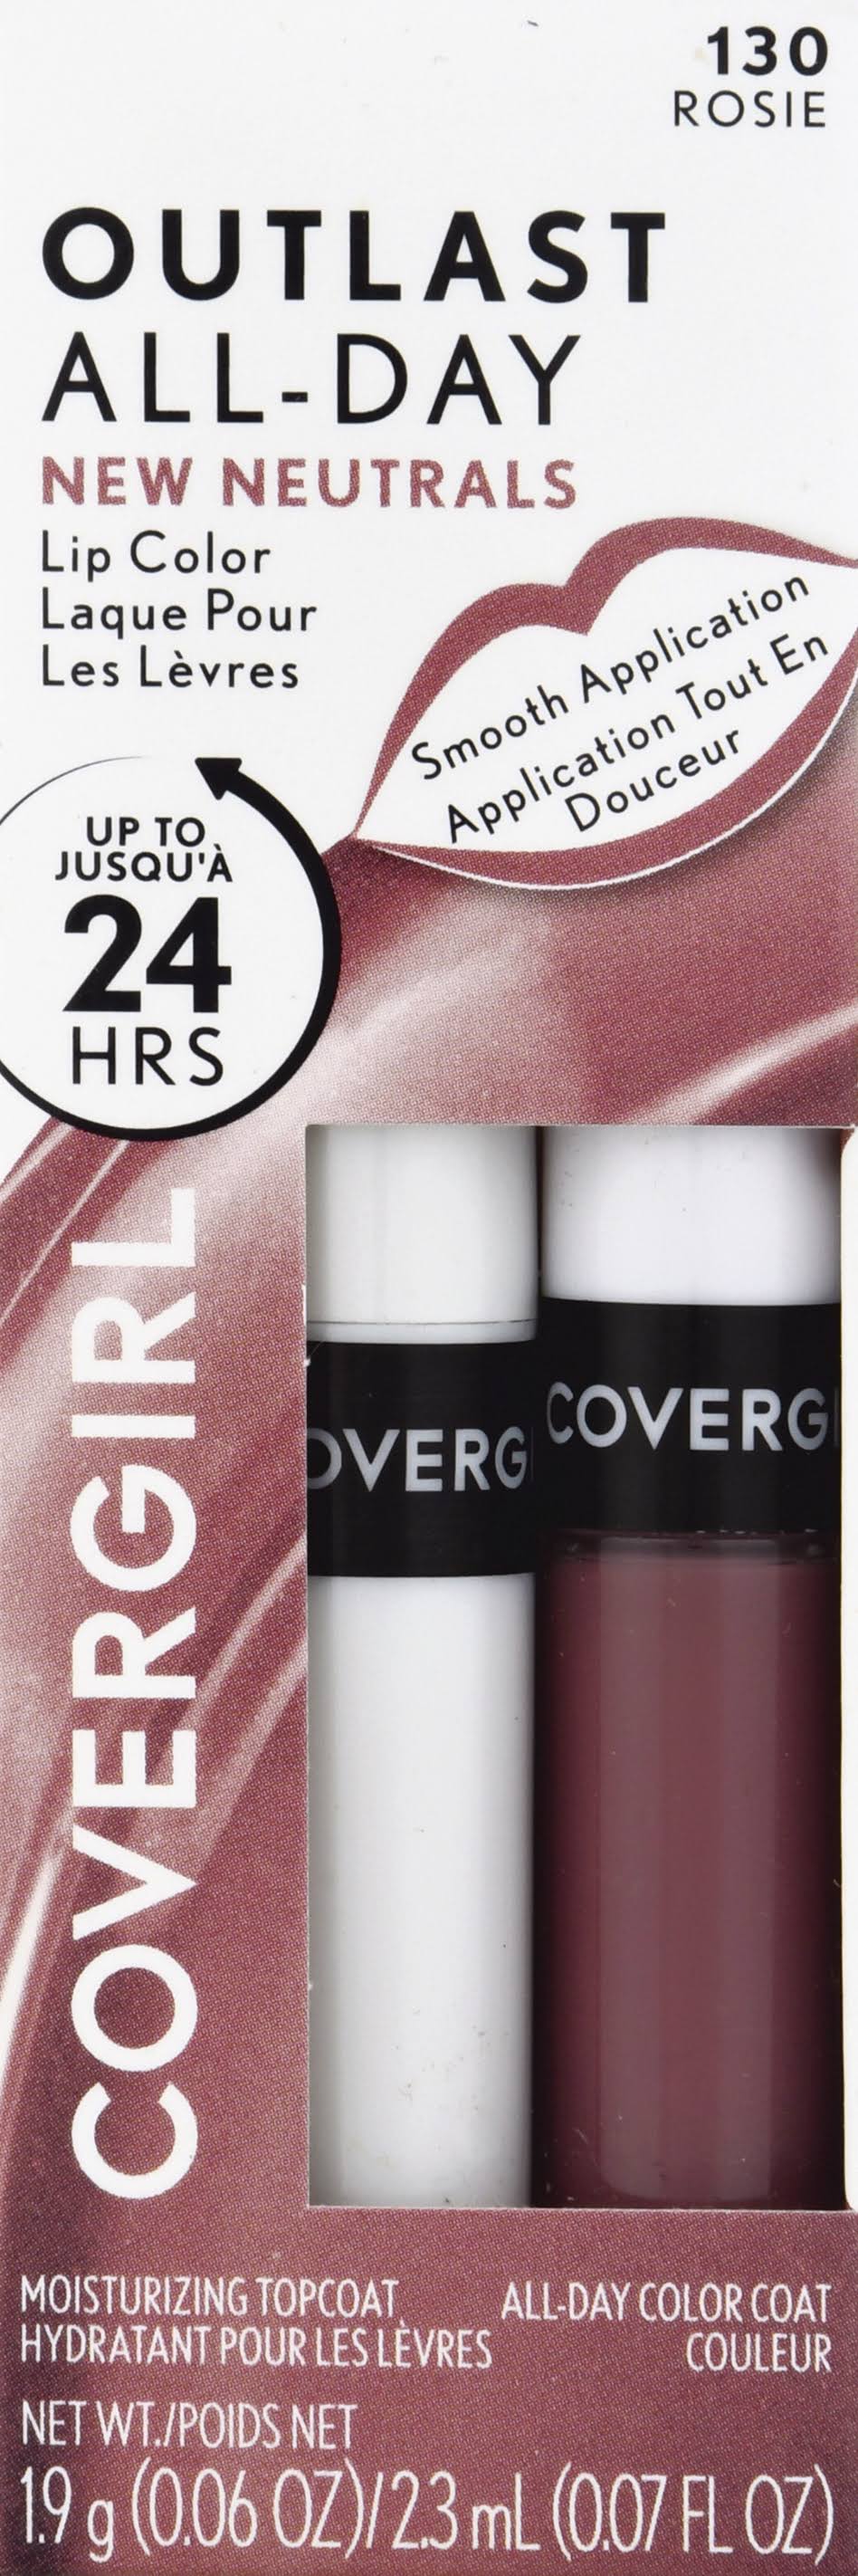 CoverGirl Outlast All Day Lip Color with Top Coat, Rosie